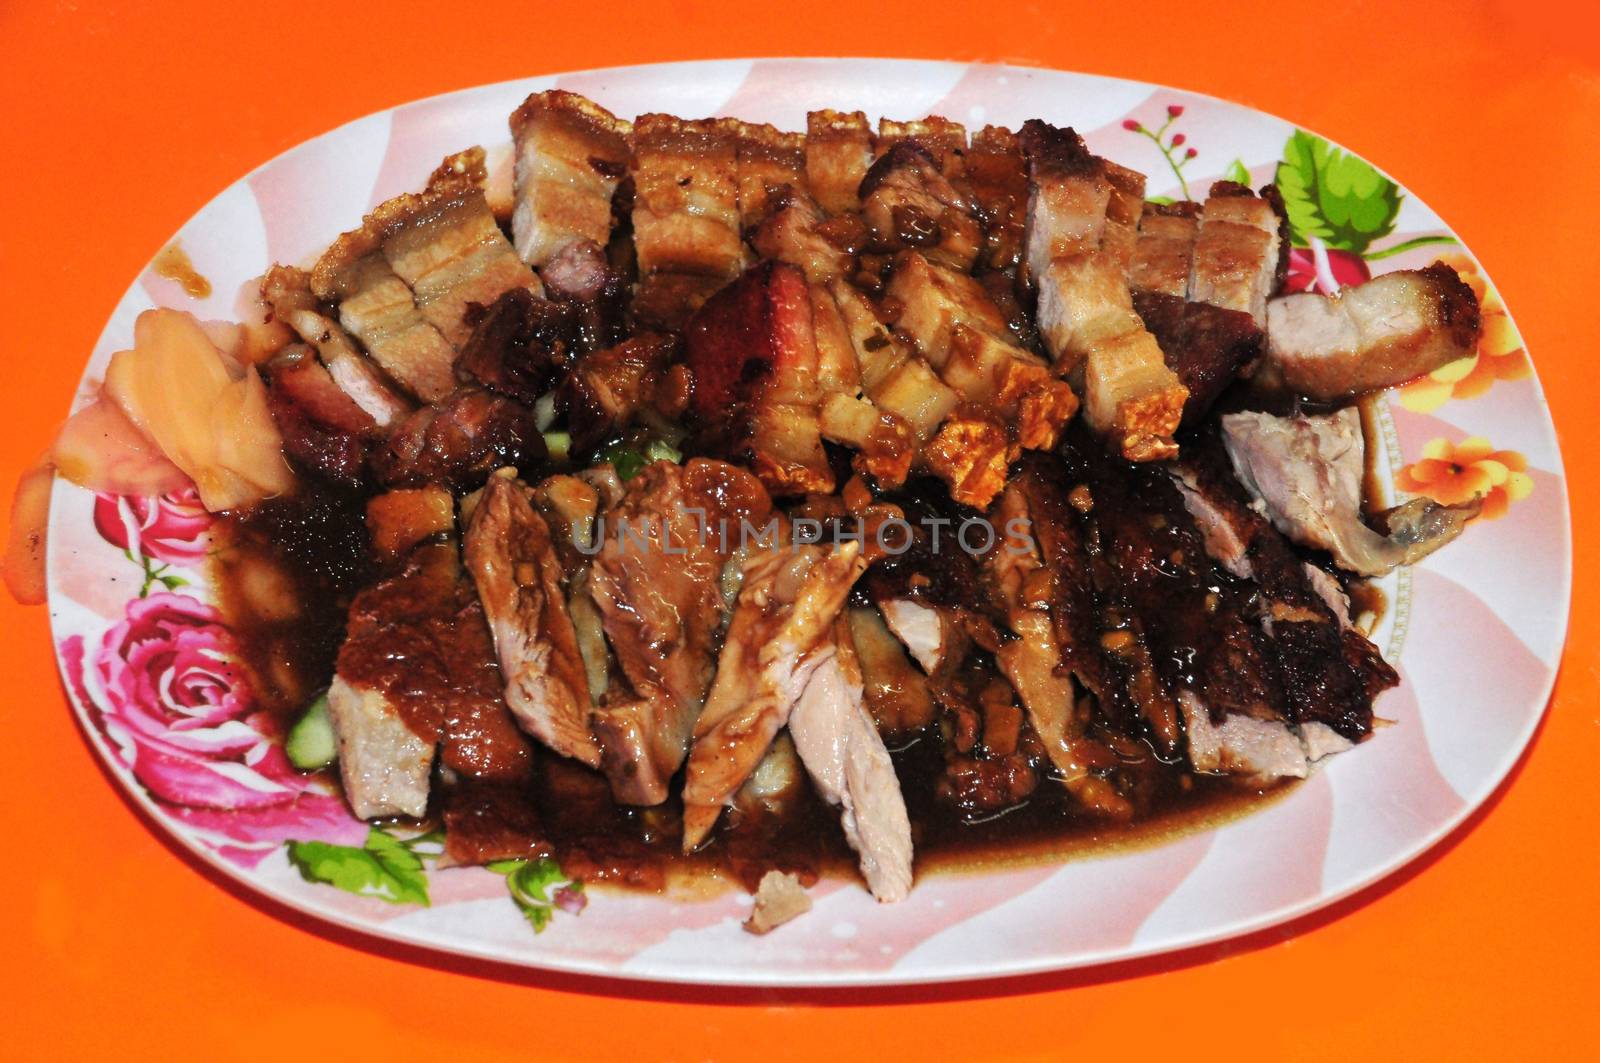 Delicious Honey roast duck and crispy roast pork by ideation90